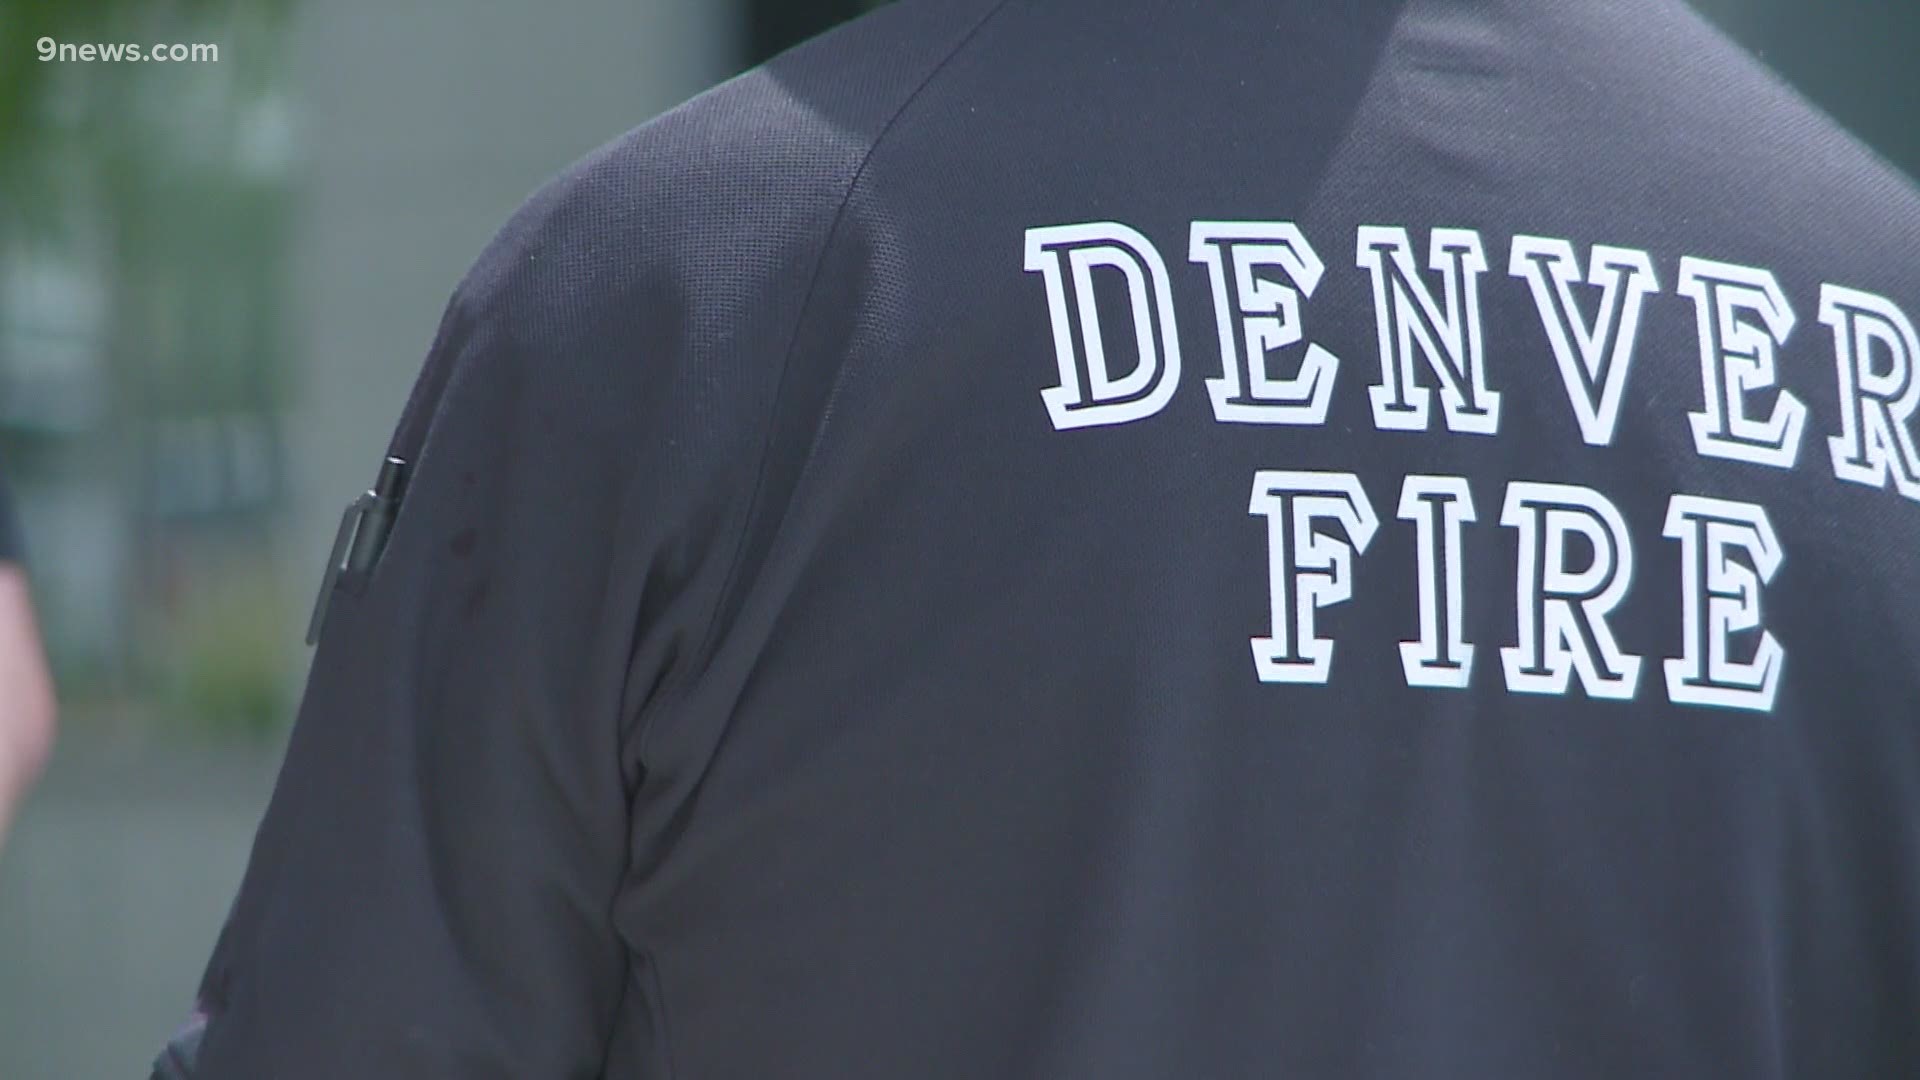 The women claim that they were treated unfairly by the department because of their gender and race. Denver Fire has not yet responded to the allegations.